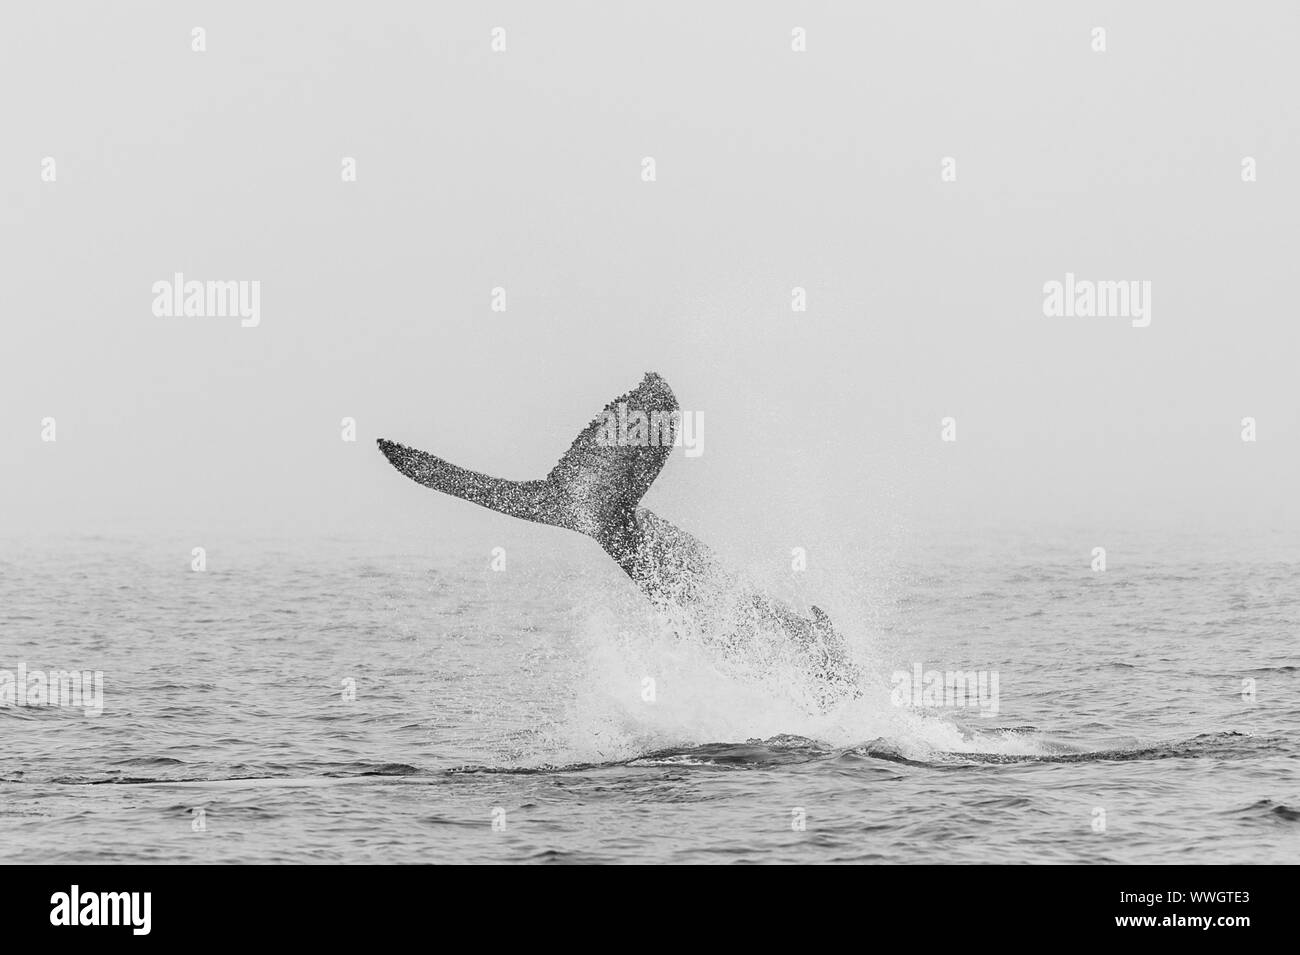 The Tail of a Humpback whale - Megaptera novaeangliae- emerging from the surface of the ocean, near Walvis Bay, Namibia. Stock Photo